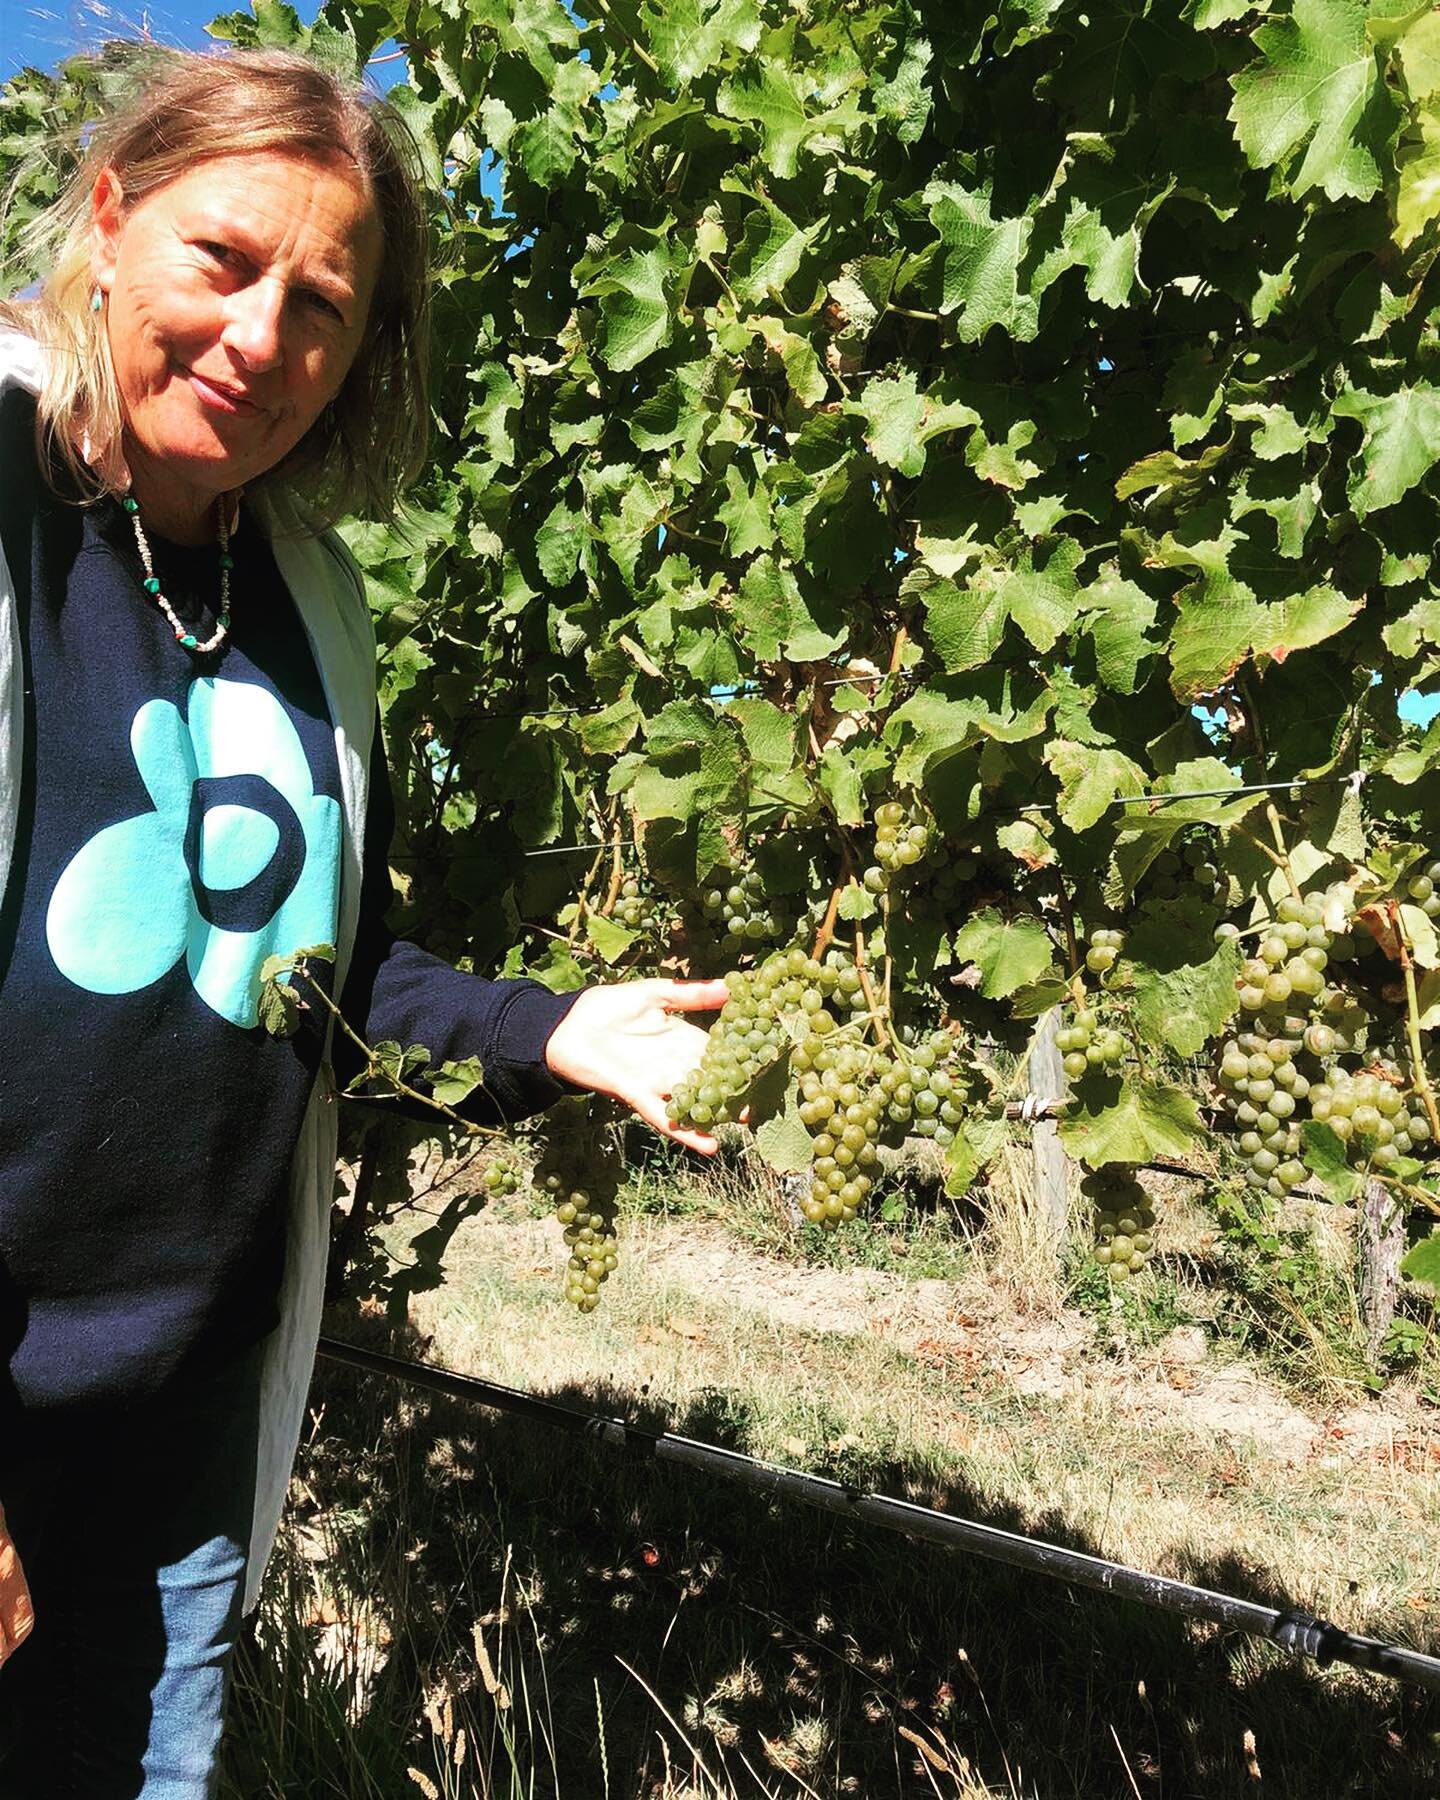 Huia winemaker Claire checking on the Sauvignon Blanc. After a taste test she&rsquo;s let us know it&rsquo;s about 2 weeks away from picking.
__
#huiawine #nzv2021 #organicwine #marlboroughwine #sauvignonblanc #veganwine #nzwine